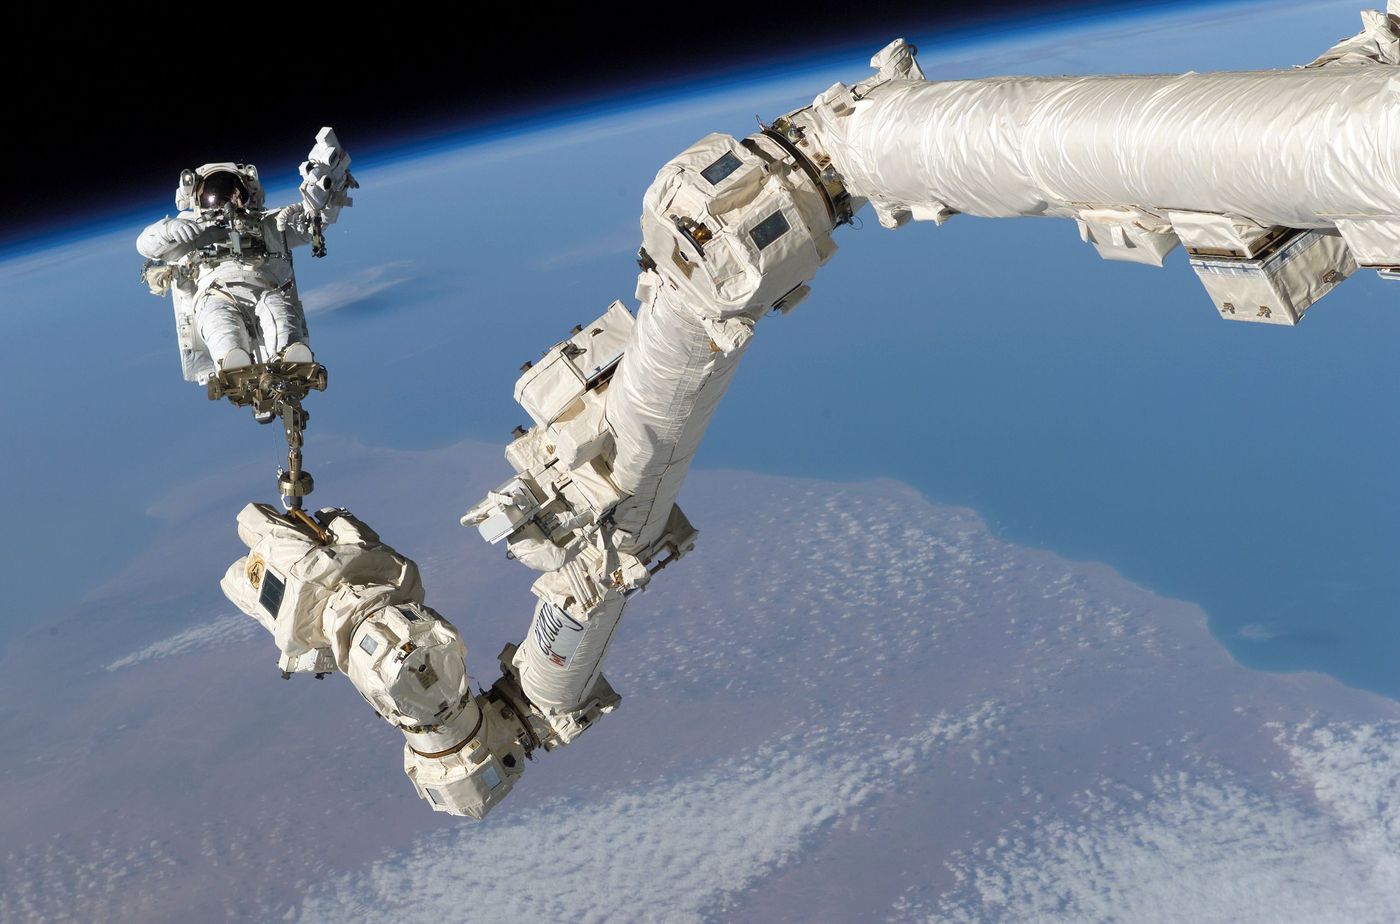 Canadarm2 pictured back in 2005, along with astronaut Steve Robinson.